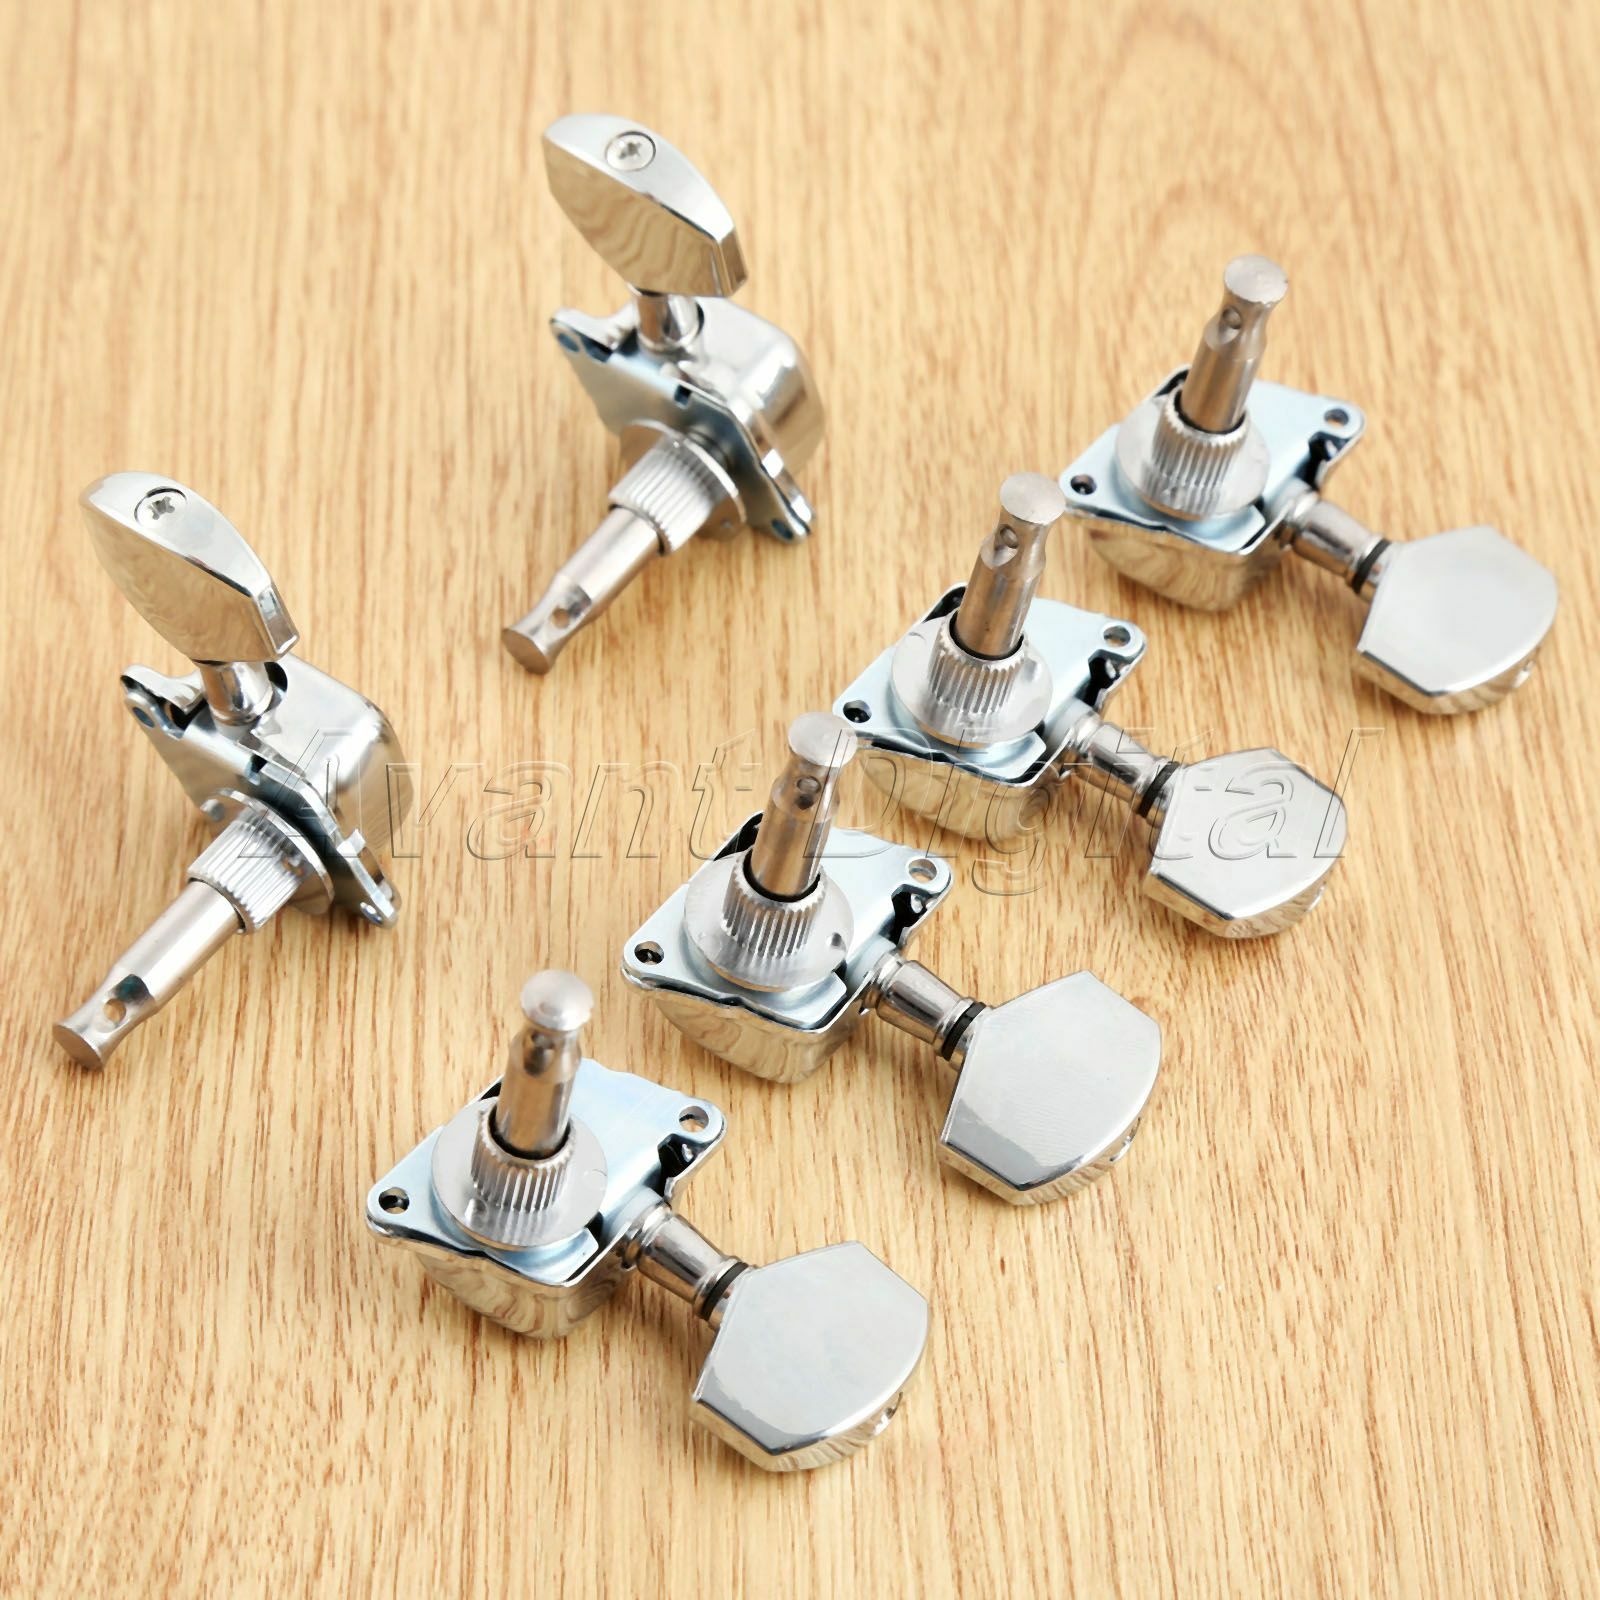 1Set Alloy Guitar Tuning Pegs keys Tuners Machine Heads For Electric Guitar